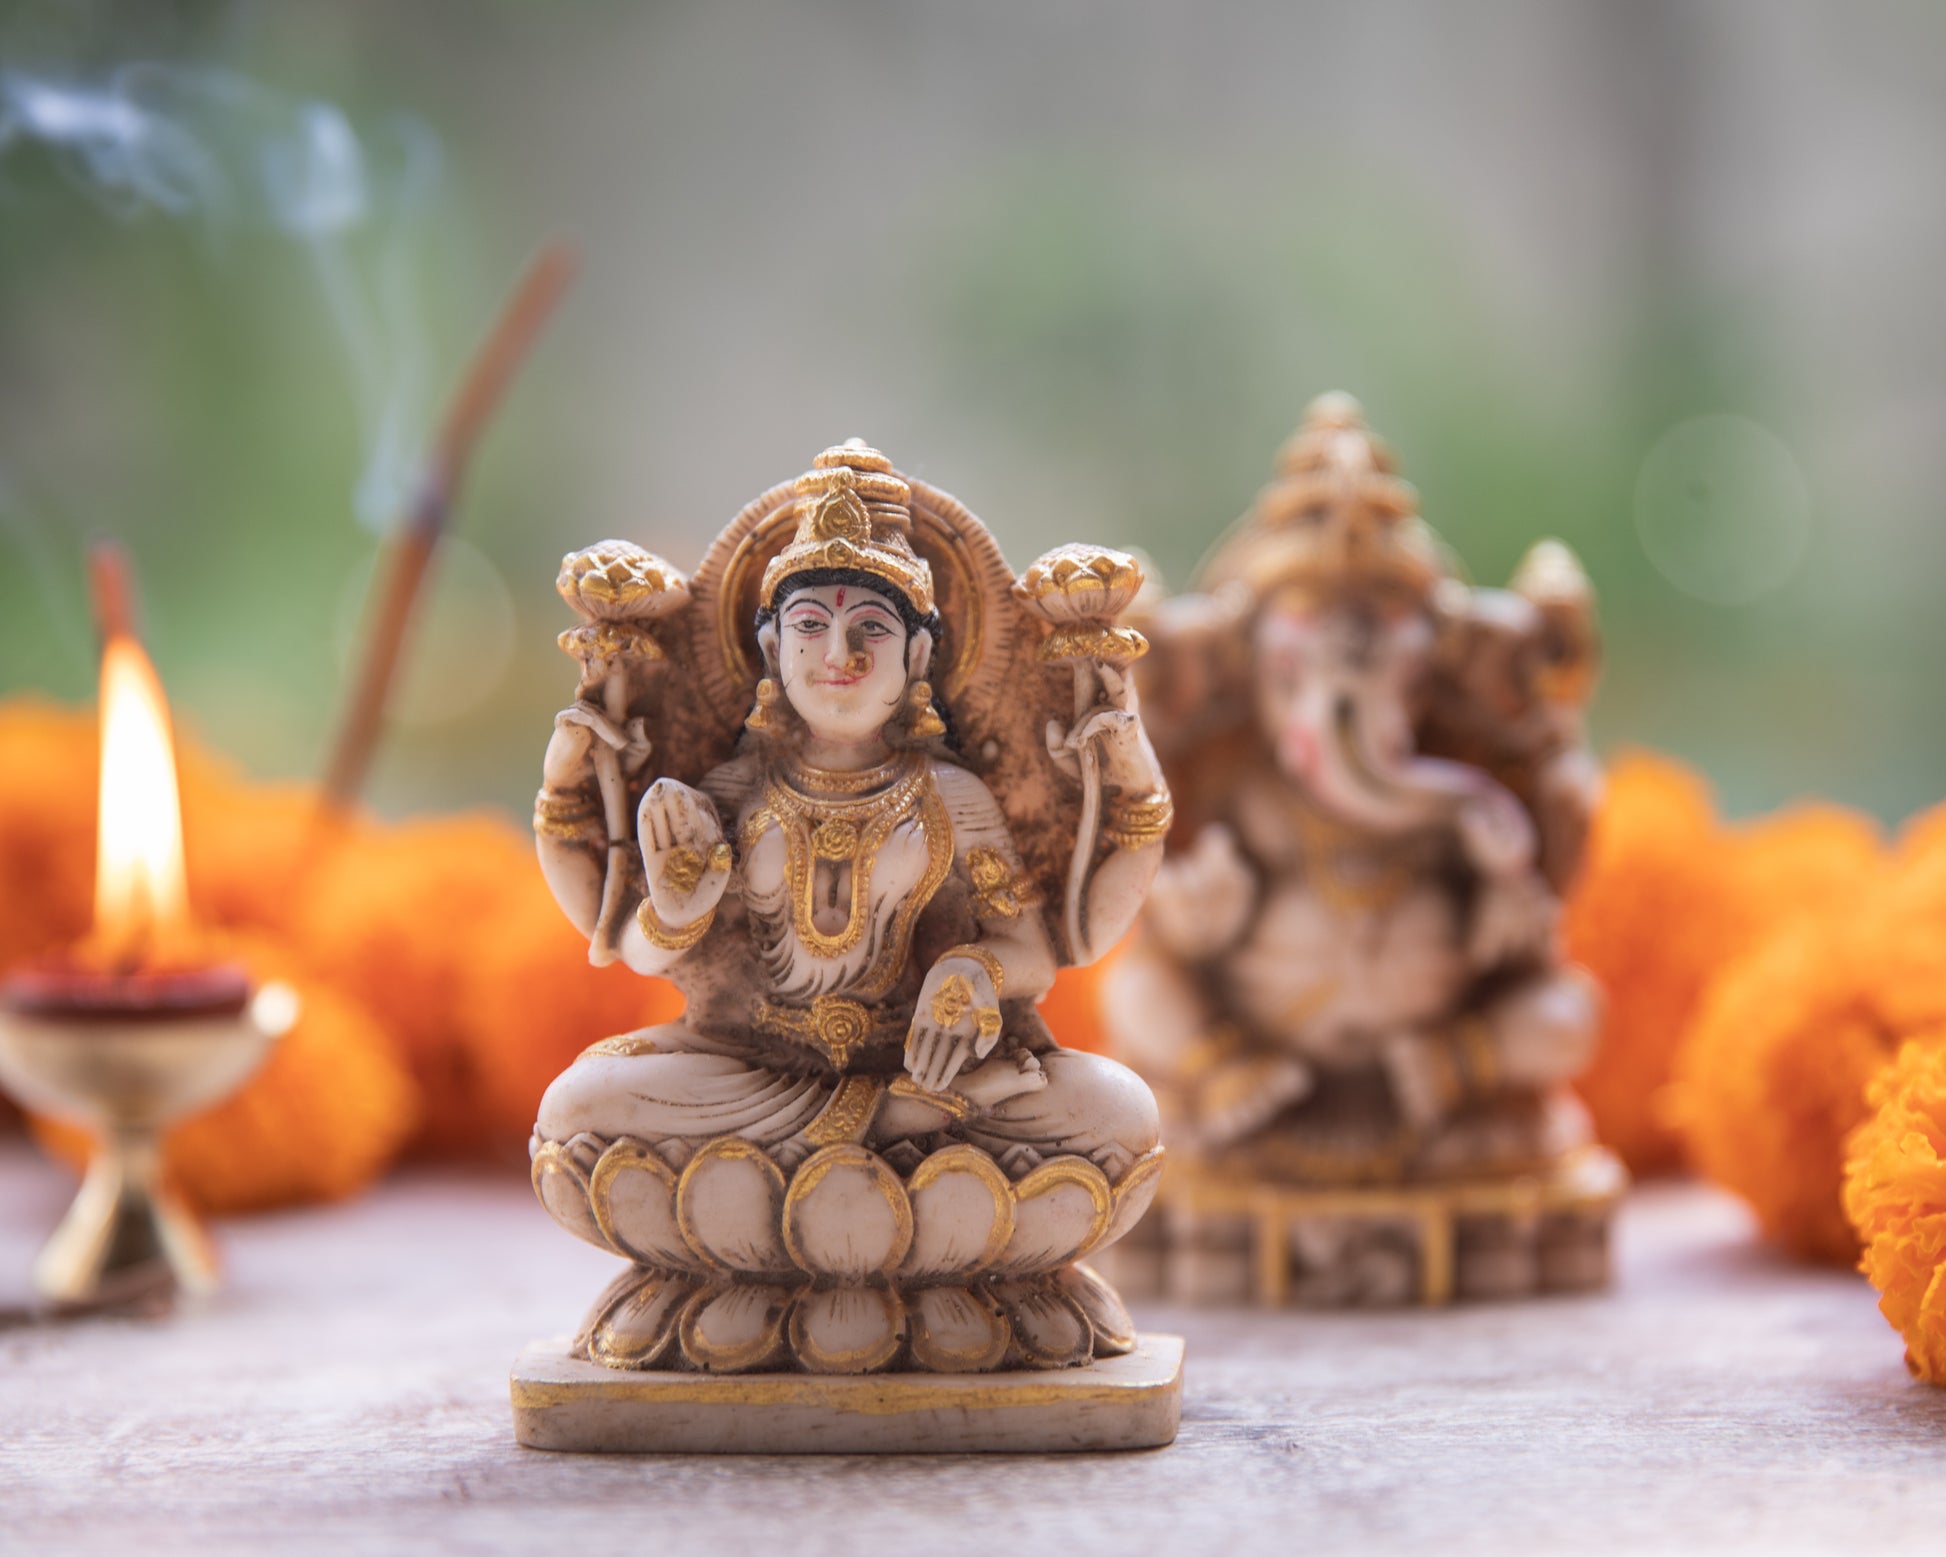 A divine and harmonious representation of two beloved deities, Goddess Lakshmi, the symbol of wealth and prosperity, and Lord Ganesh, the remover of obstacles.